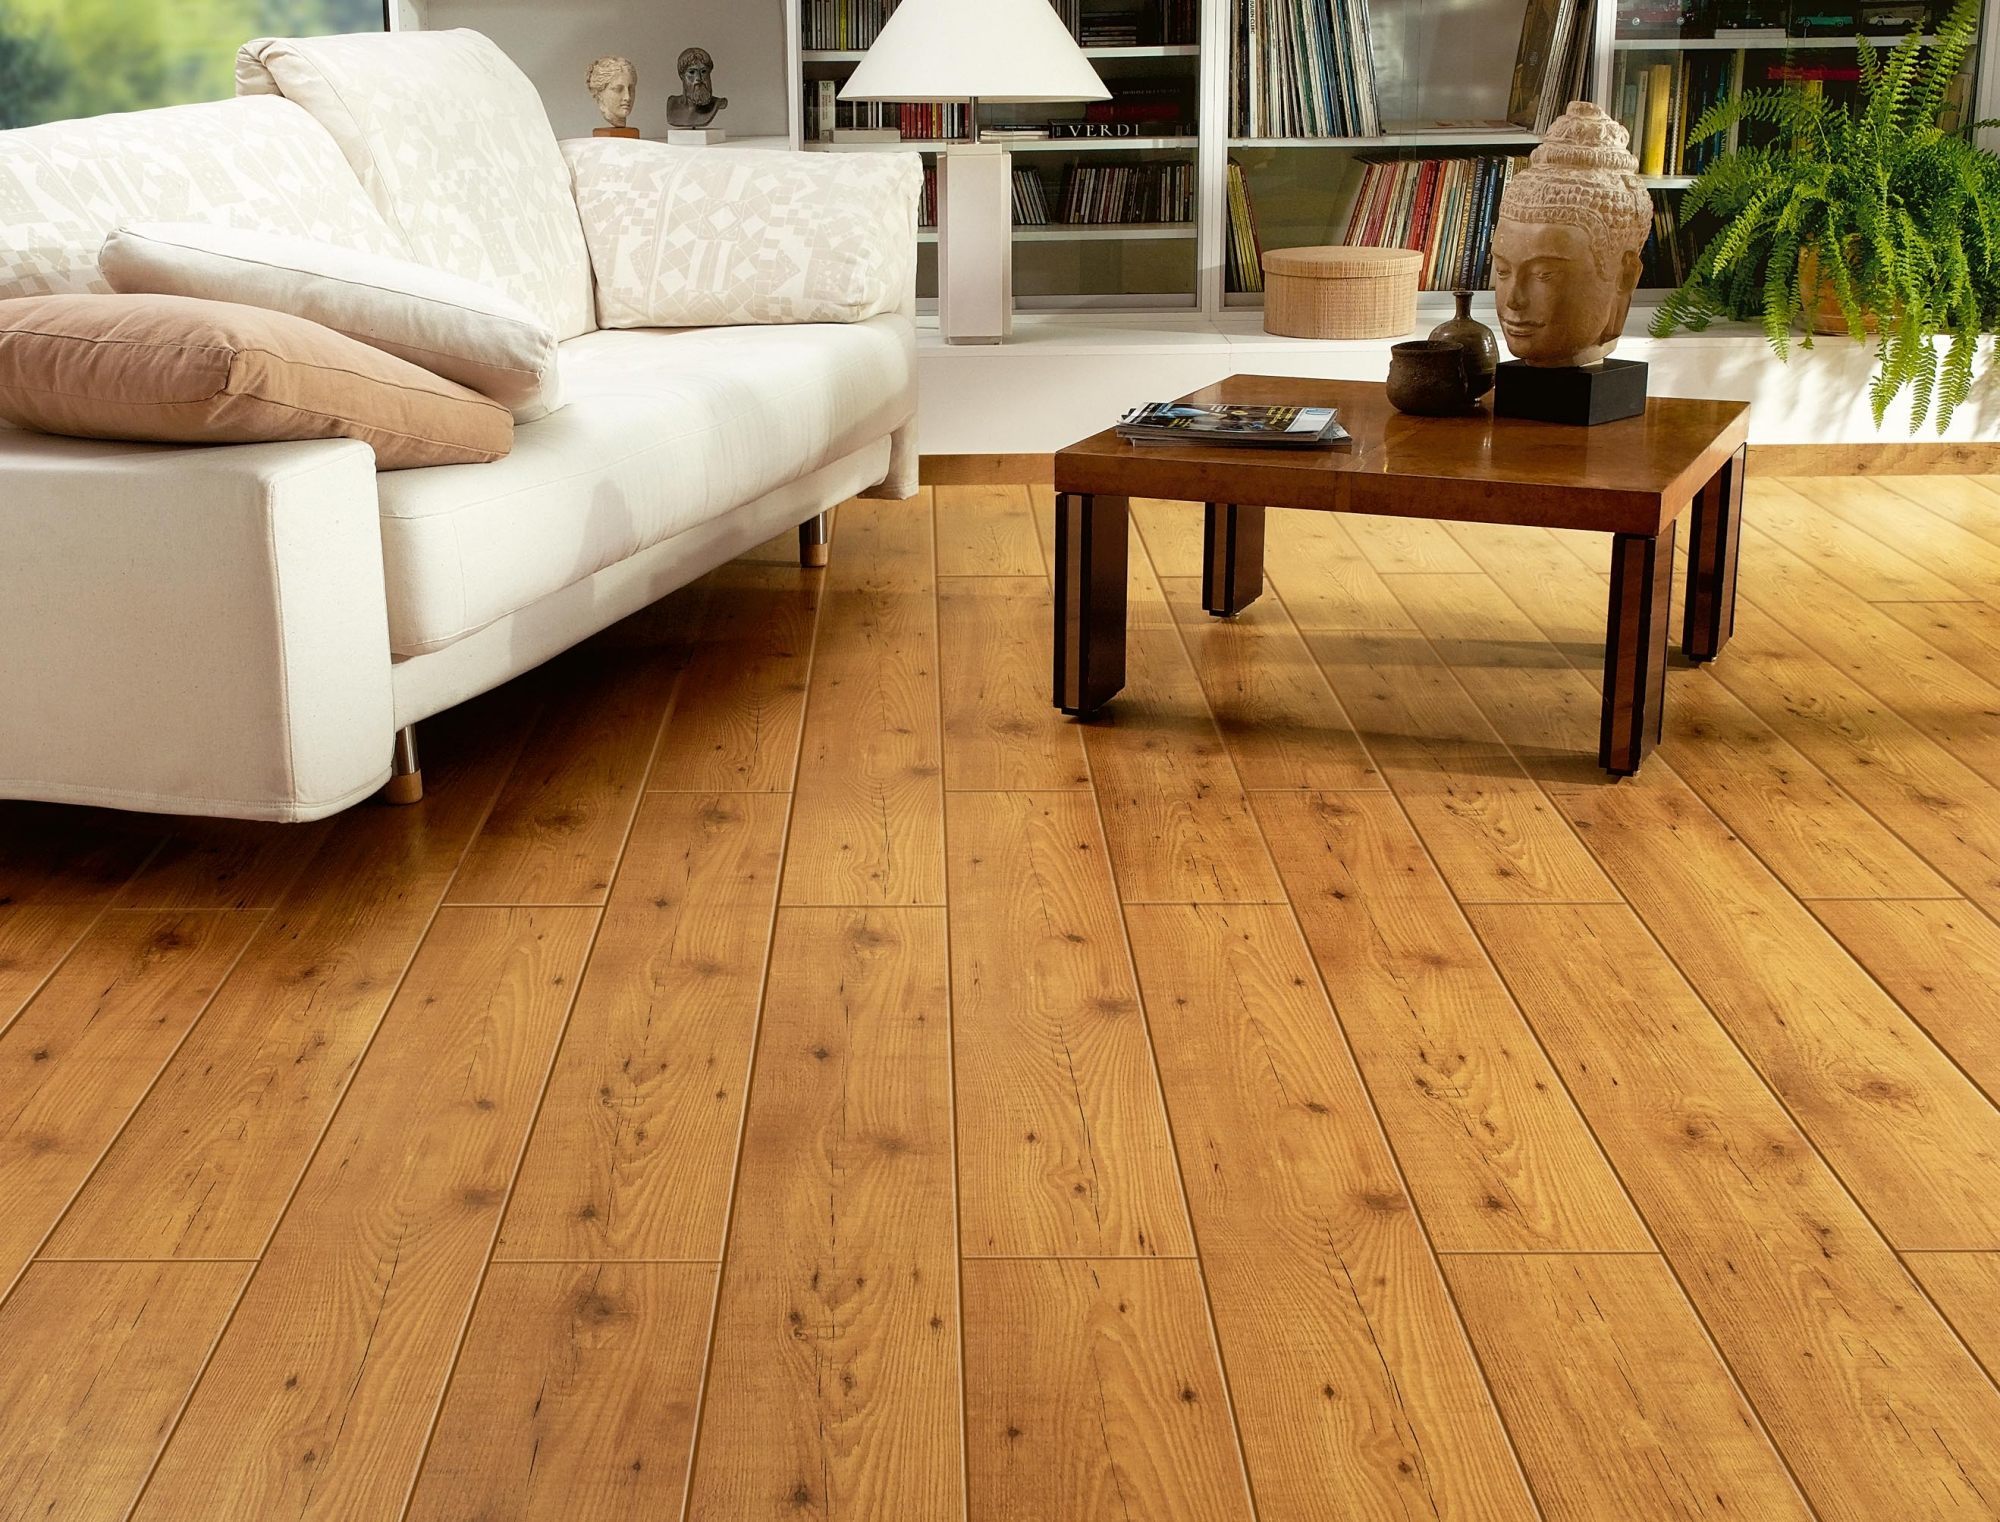 Planning For Wooden Flooring? Learn About Different Types Of Available Flooring Options